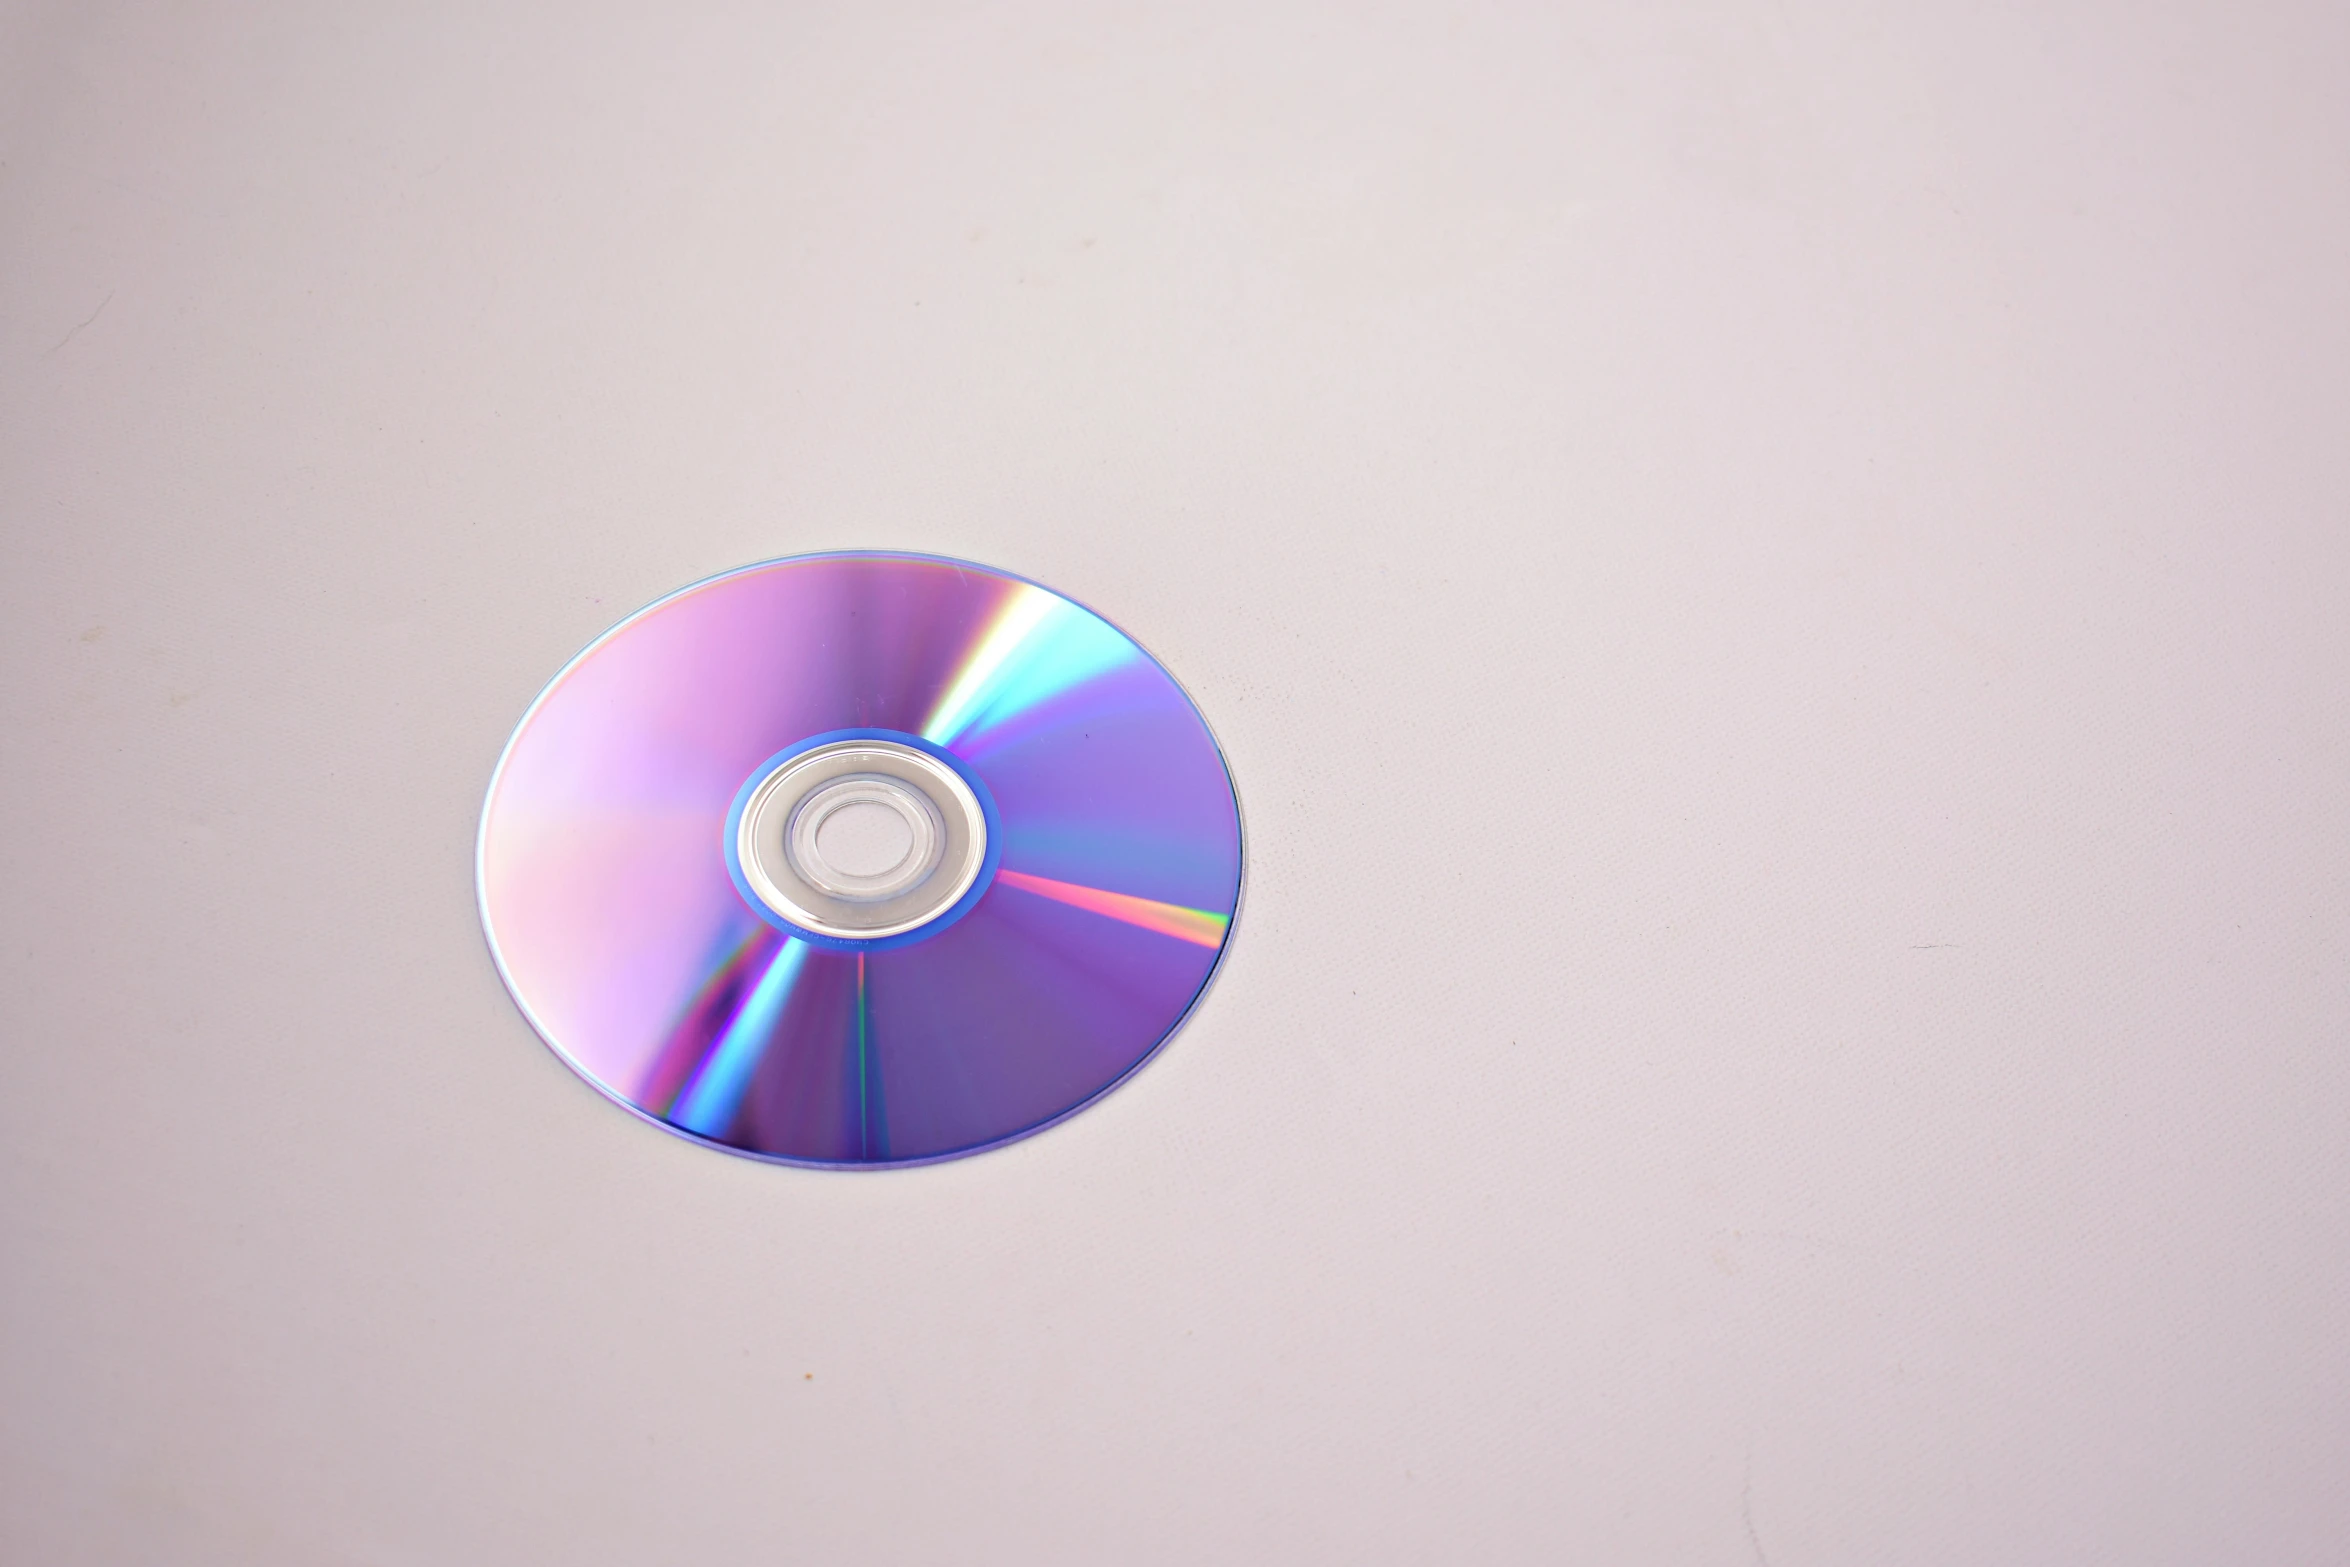 a cd sitting on top of a white surface, 15081959 21121991 01012000 4k, real photograph, blueray, small